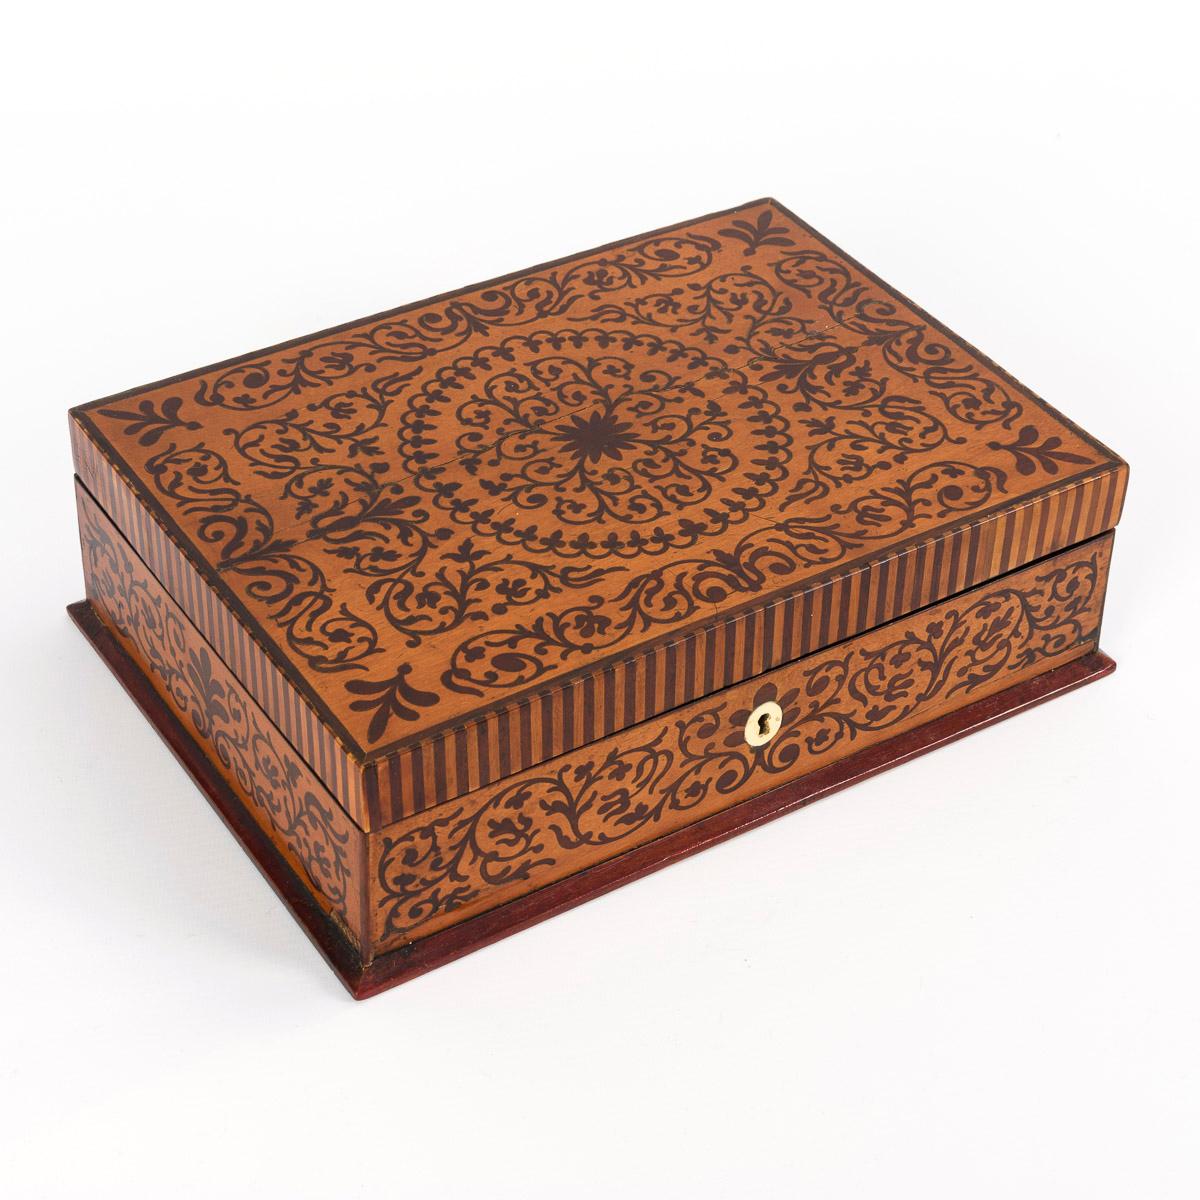 Image of 19th century maple and mahogany veneered jewelry box with patterned and scrolling marquetry